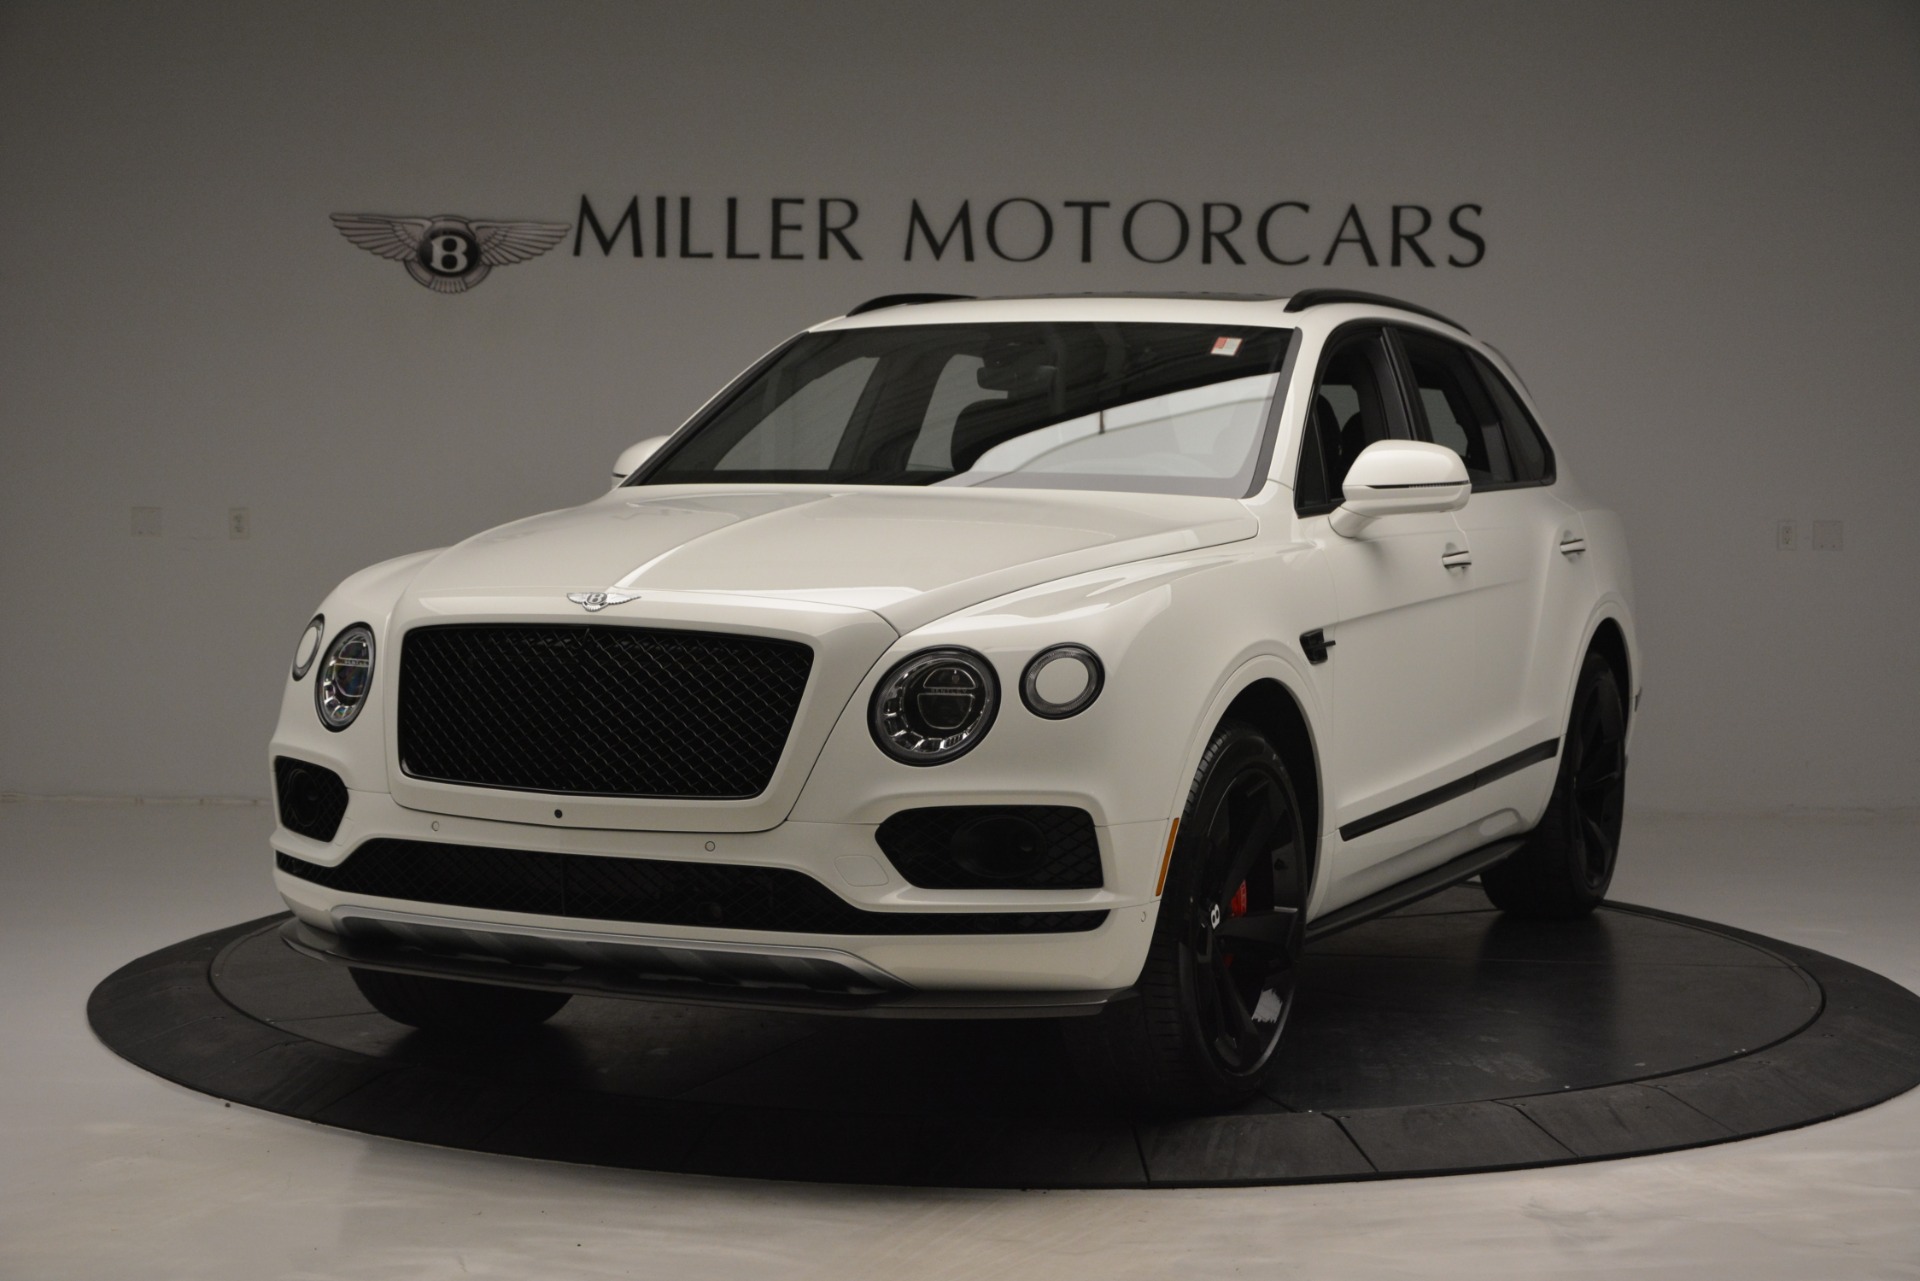 New 2019 Bentley Bentayga V8 for sale Sold at McLaren Greenwich in Greenwich CT 06830 1